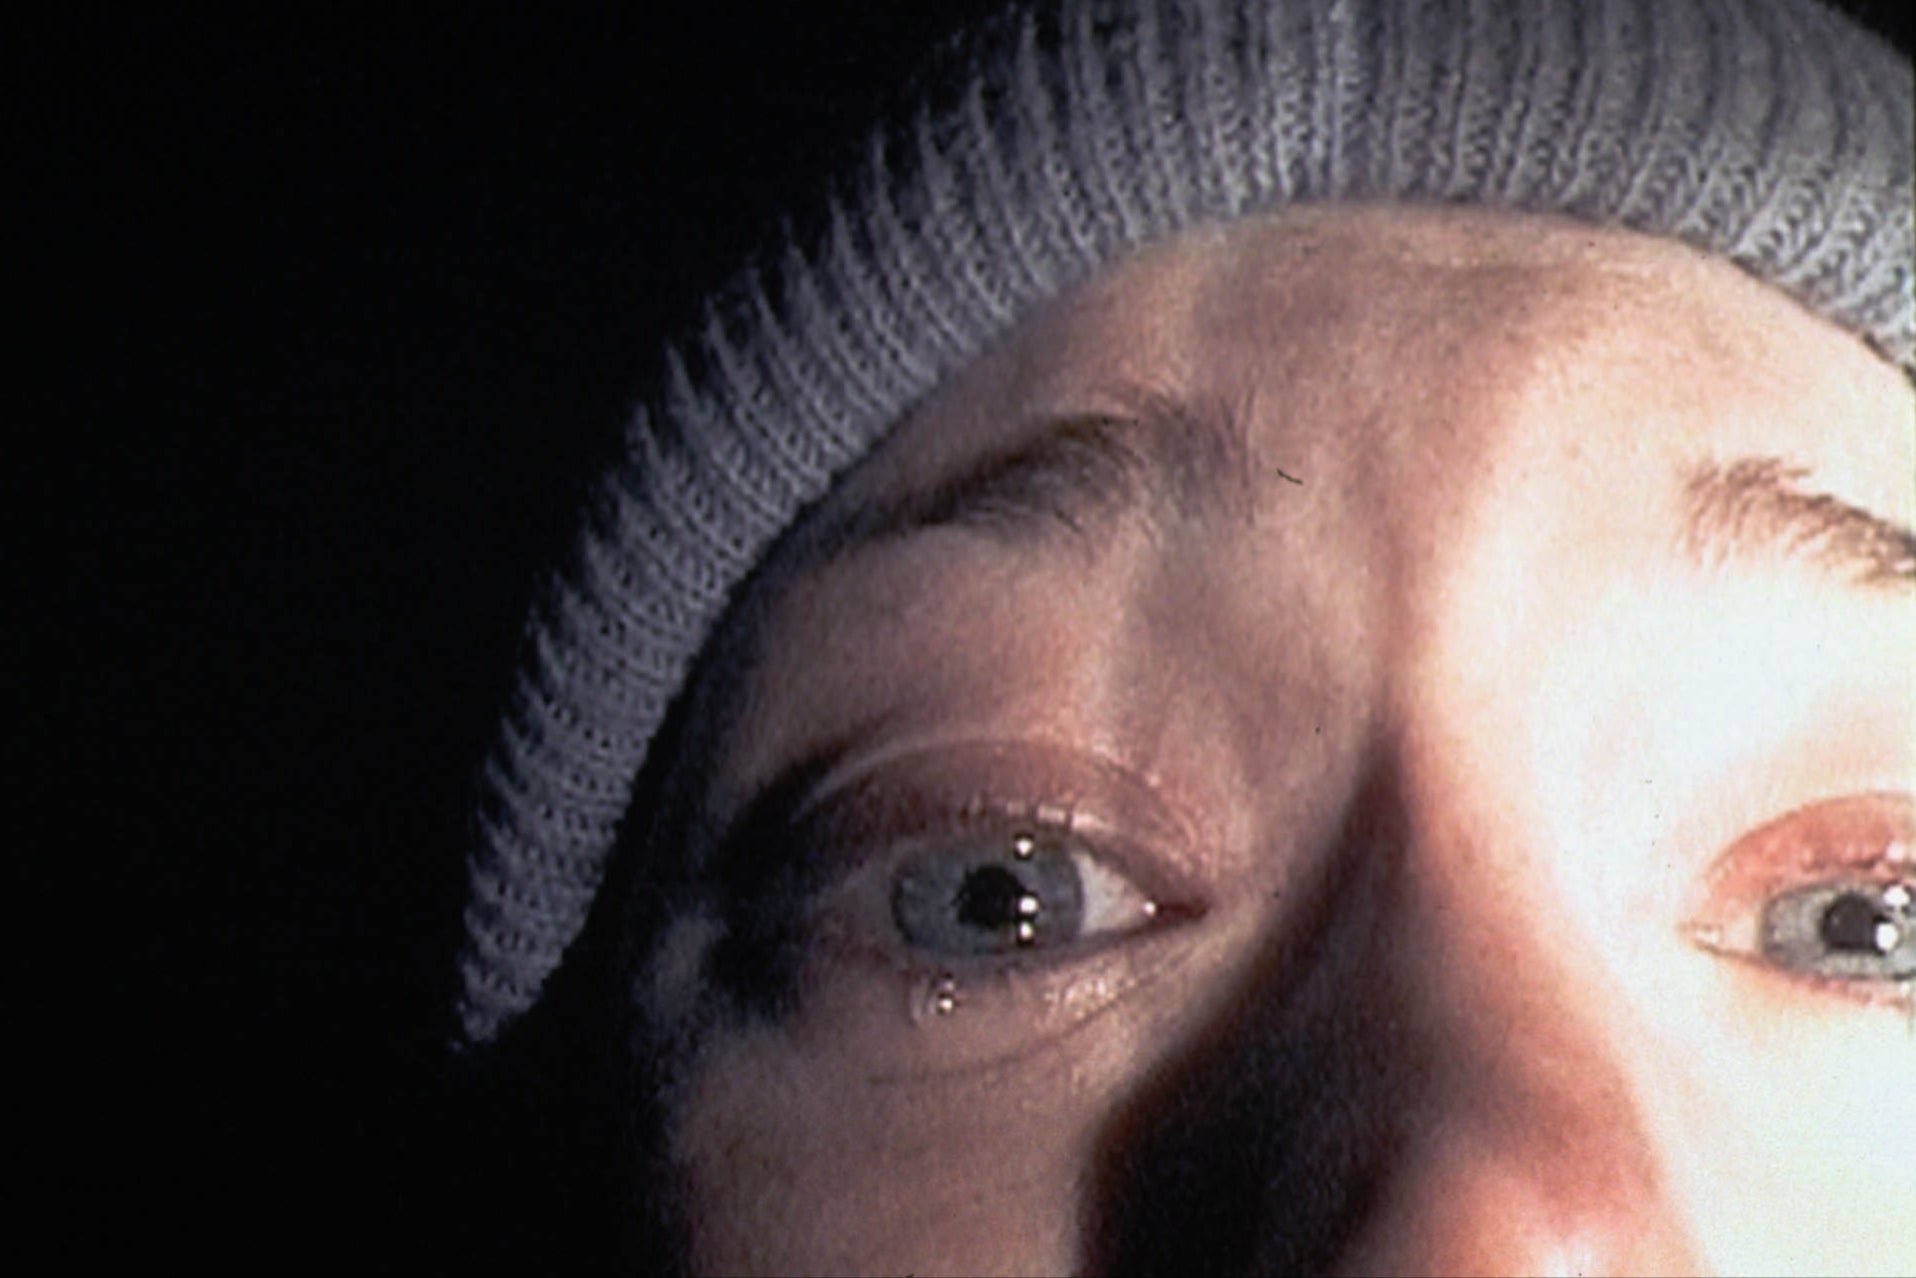 Rei Hance (formerly known as Heather Donahue) in ‘The Blair Witch Project’